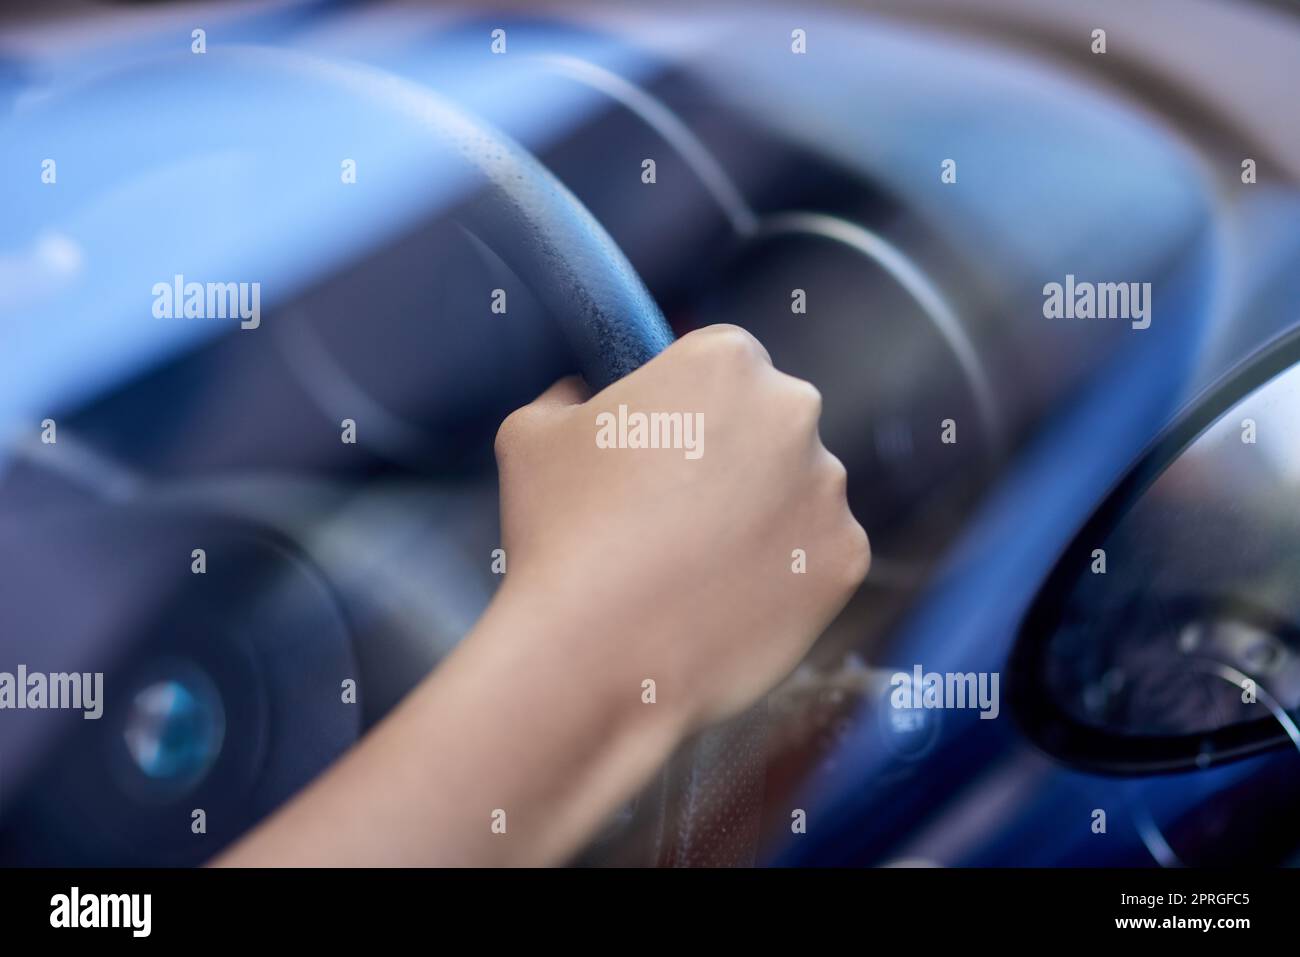 Premium Photo  Male hand holding car auto icon on blue surface